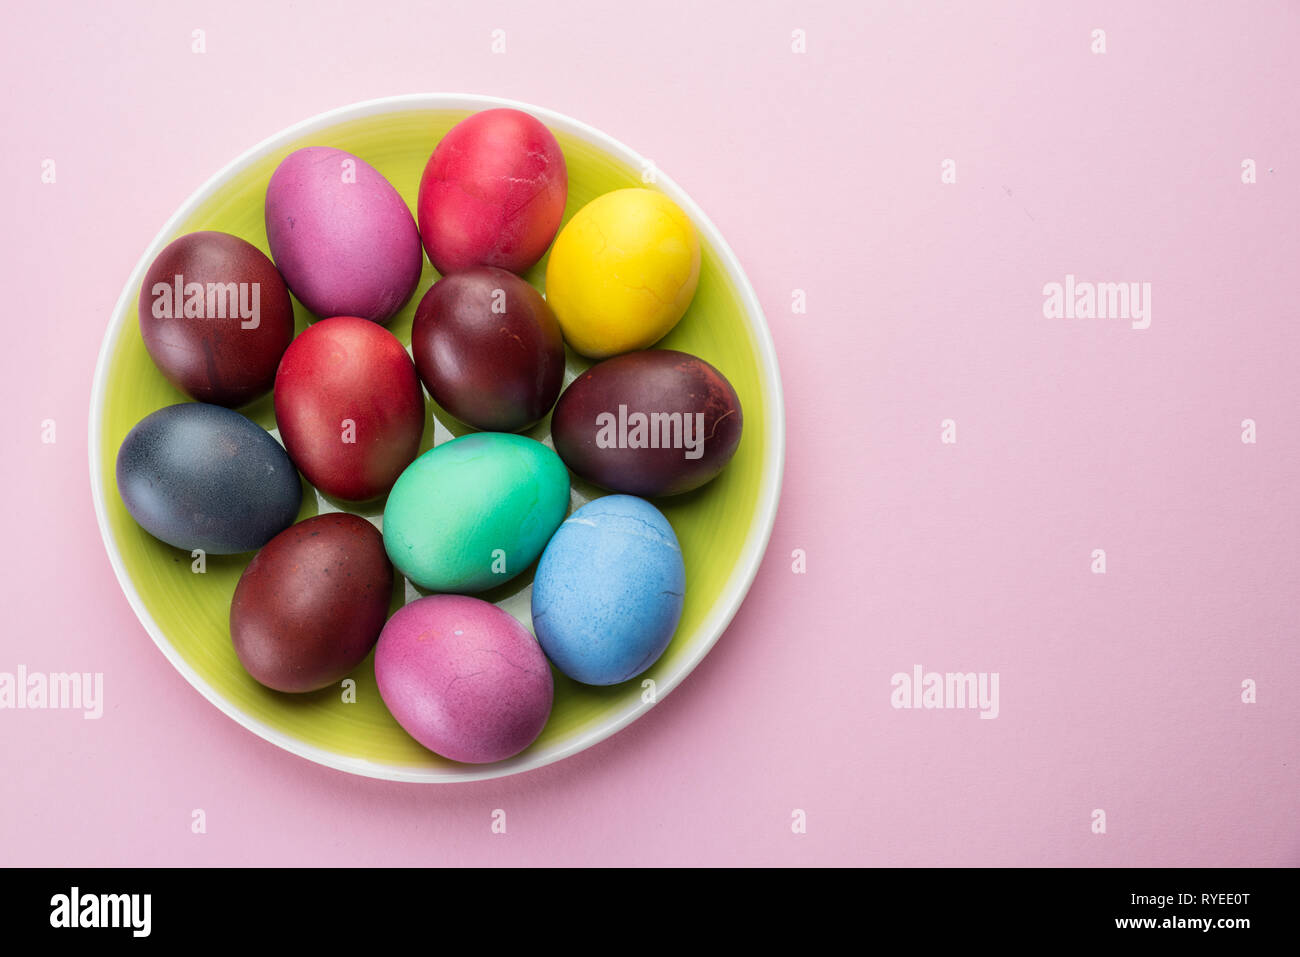 Colorful Easter eggs as an attribute of Easter celebration. Pink background. Stock Photo